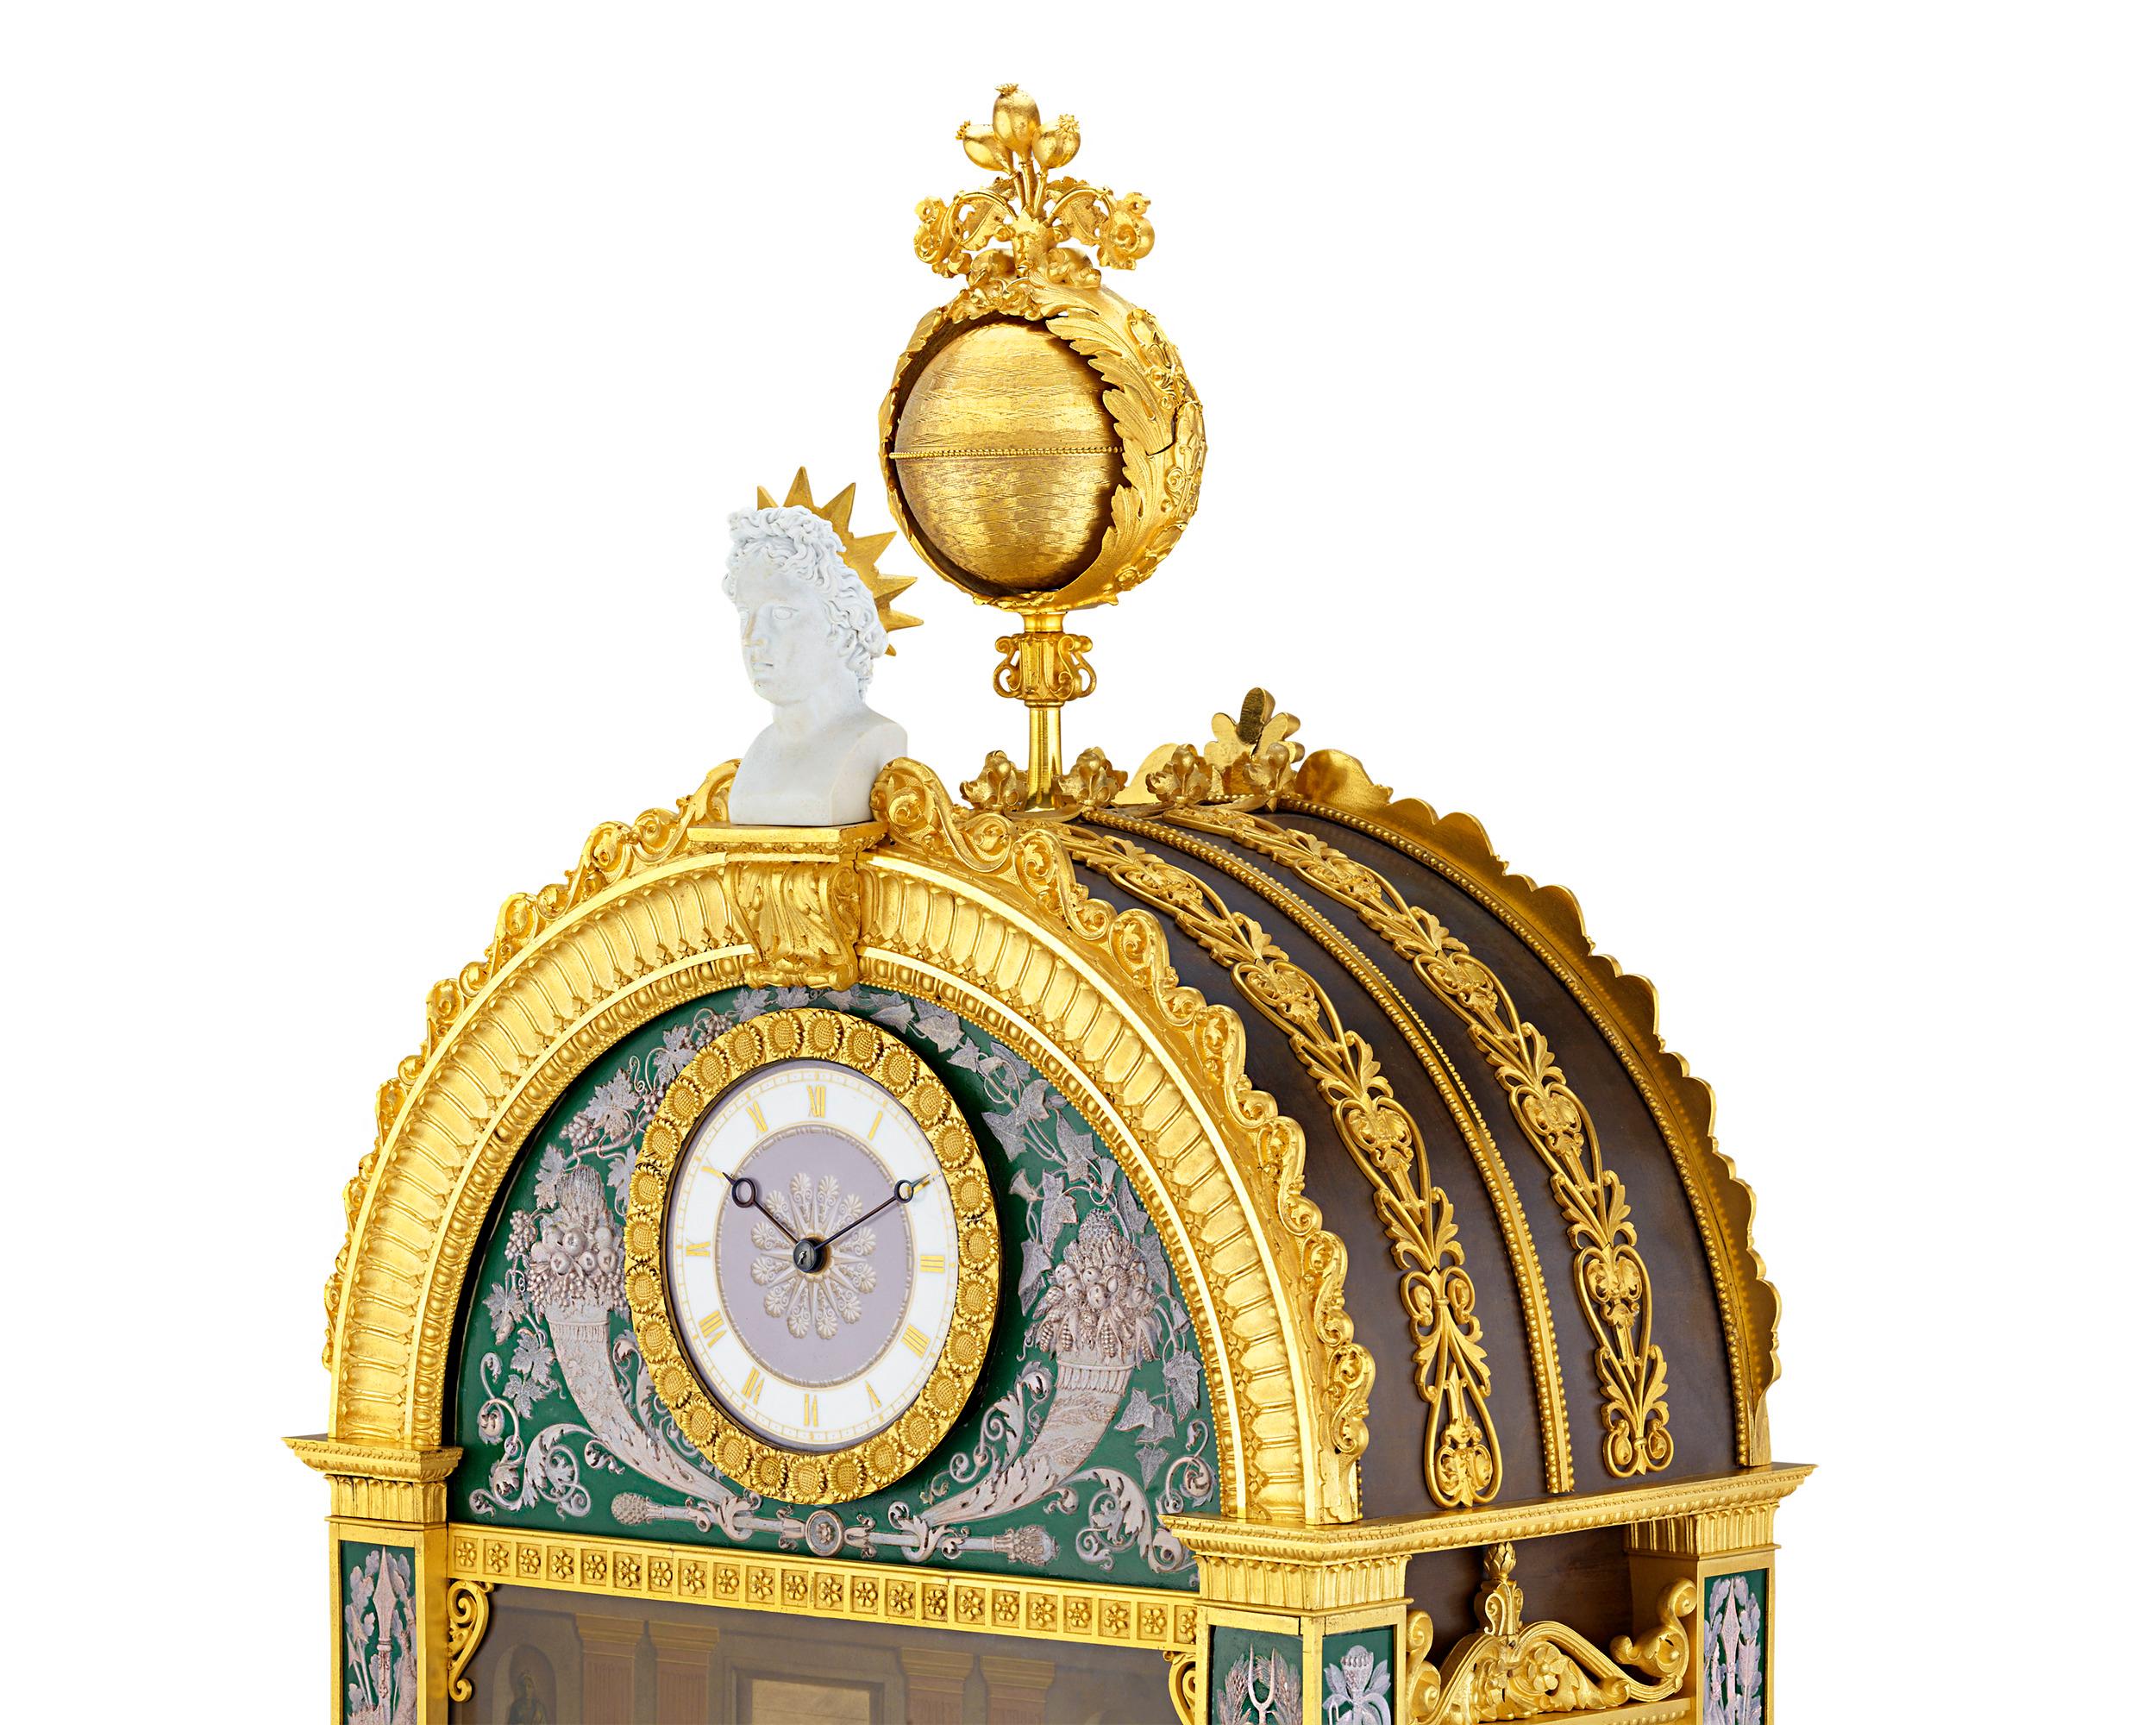 French King Louis Philippe i of France's Large Mantel Clock with Sèvres Porcelain